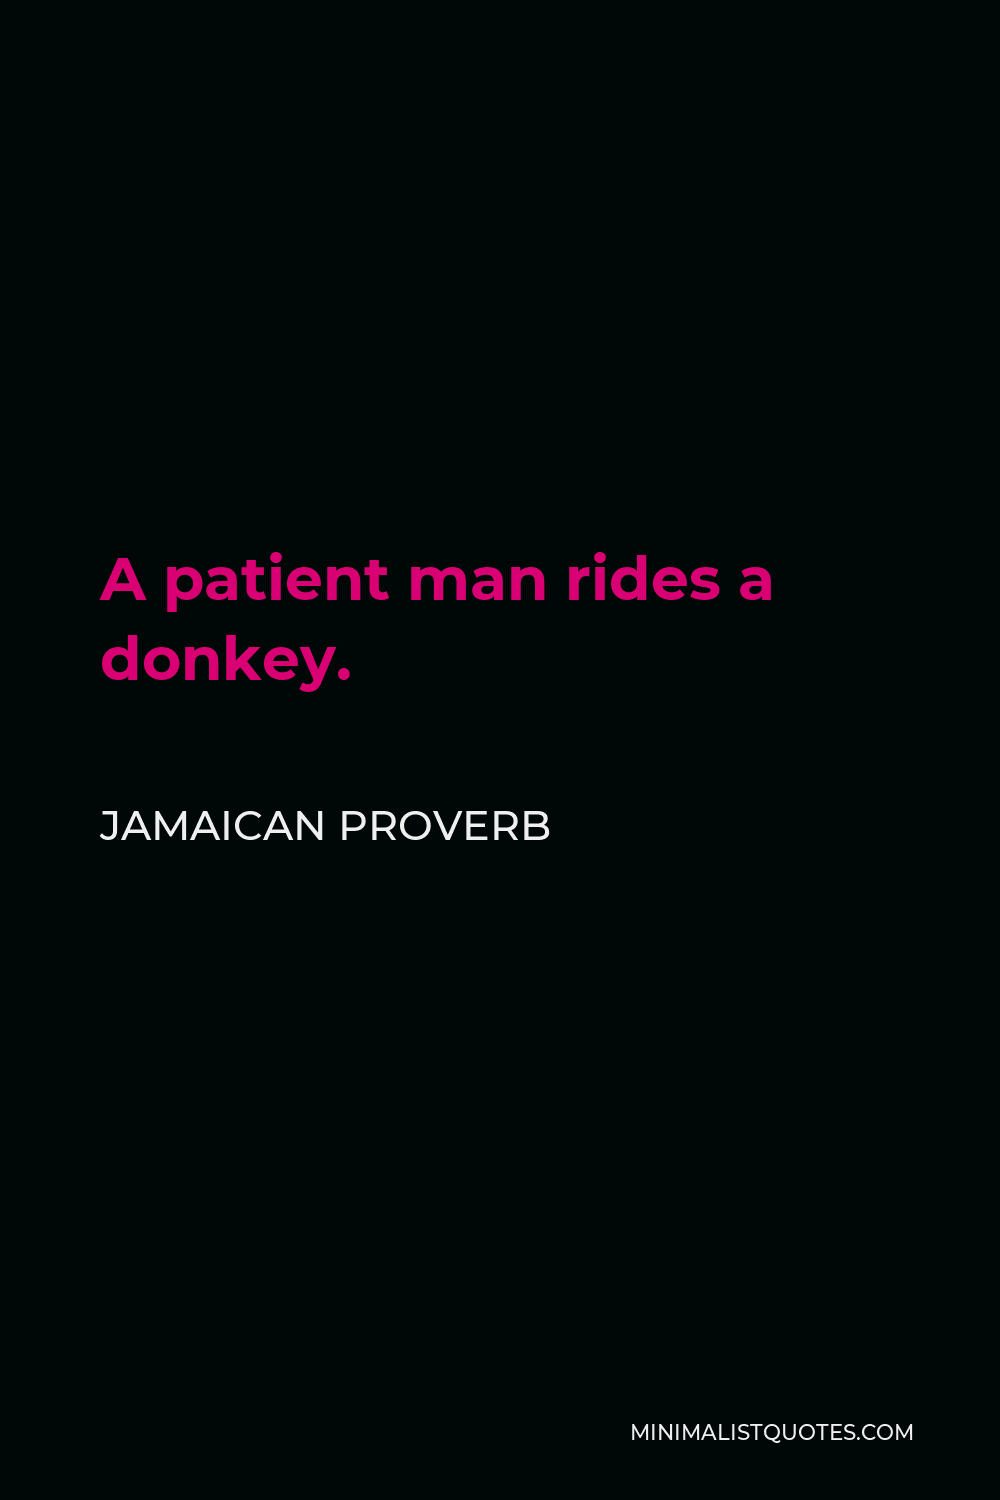 Jamaican Proverb Quote - A patient man rides a donkey.